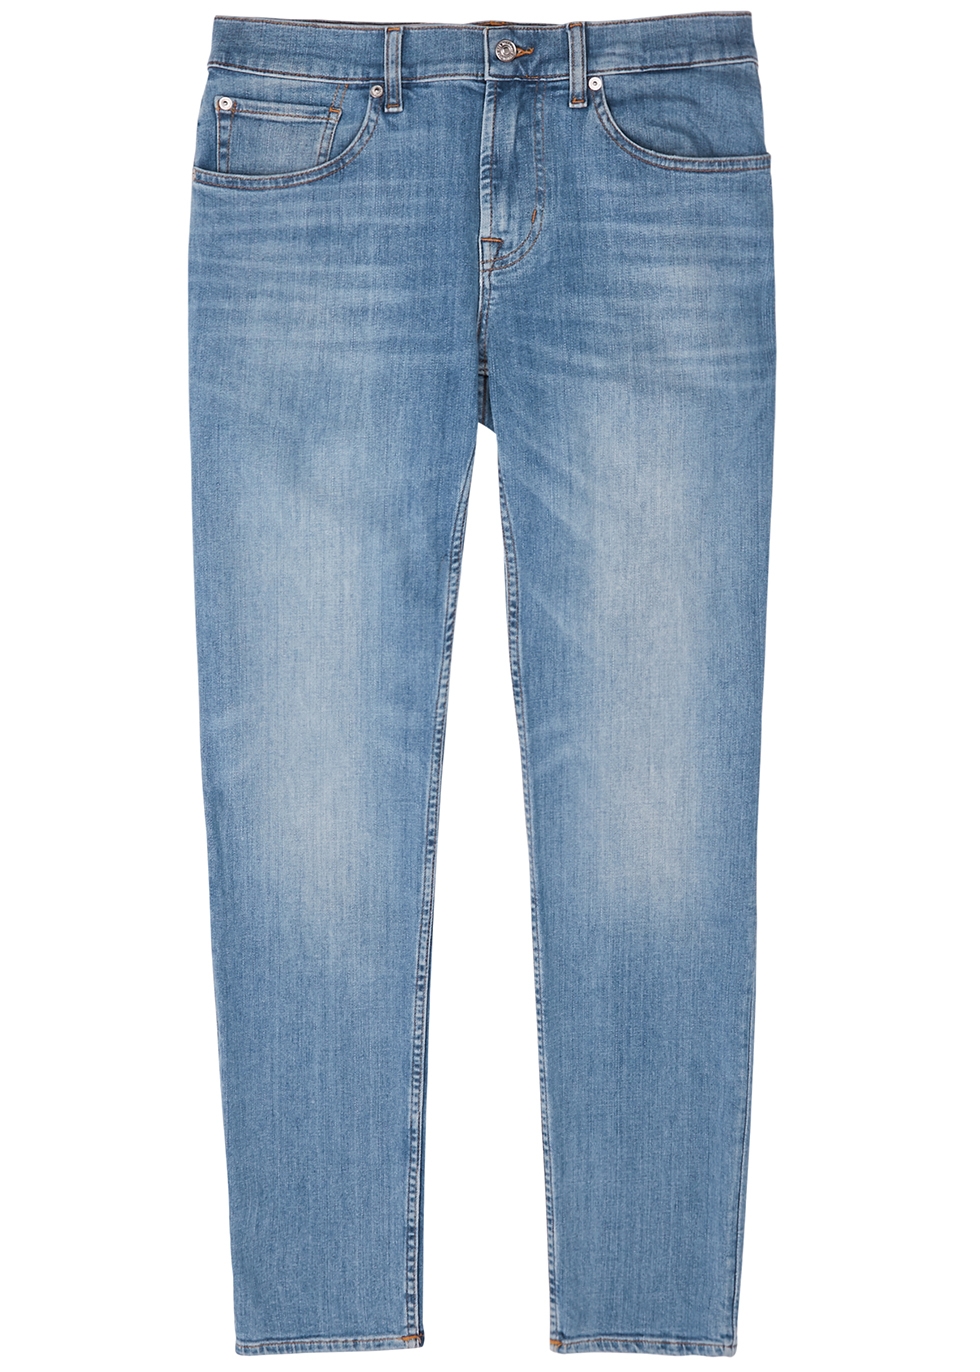 7 For All Mankind Slimmy Tapered Earthkind jeans - Harvey Nichols